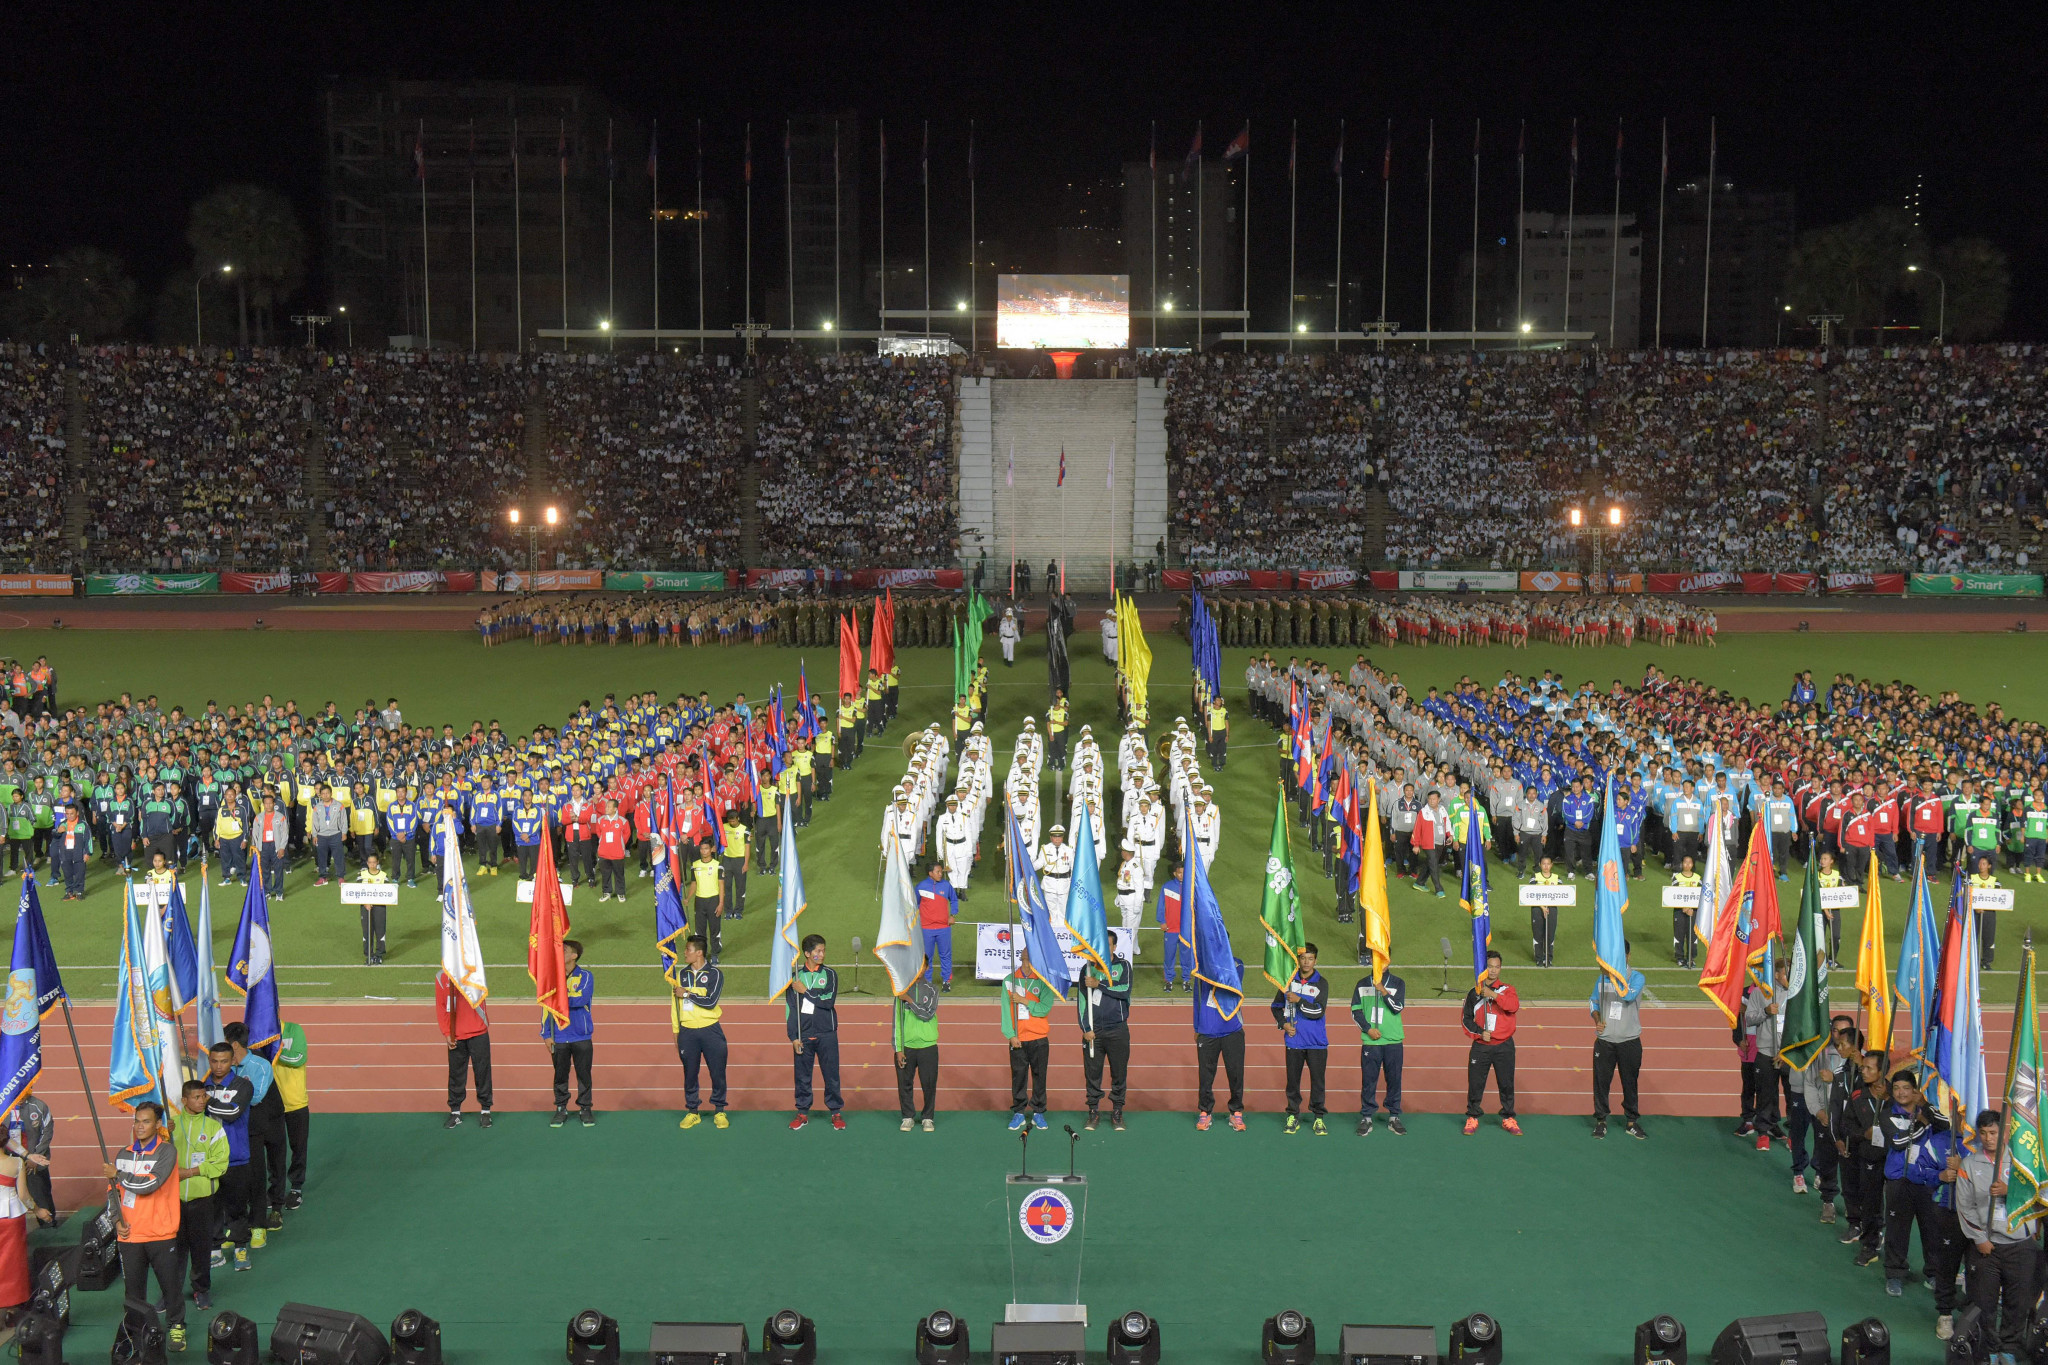 The taekwondo uniforms will be used in the Opening Ceremony of the Cambodian National Games ©Getty Images